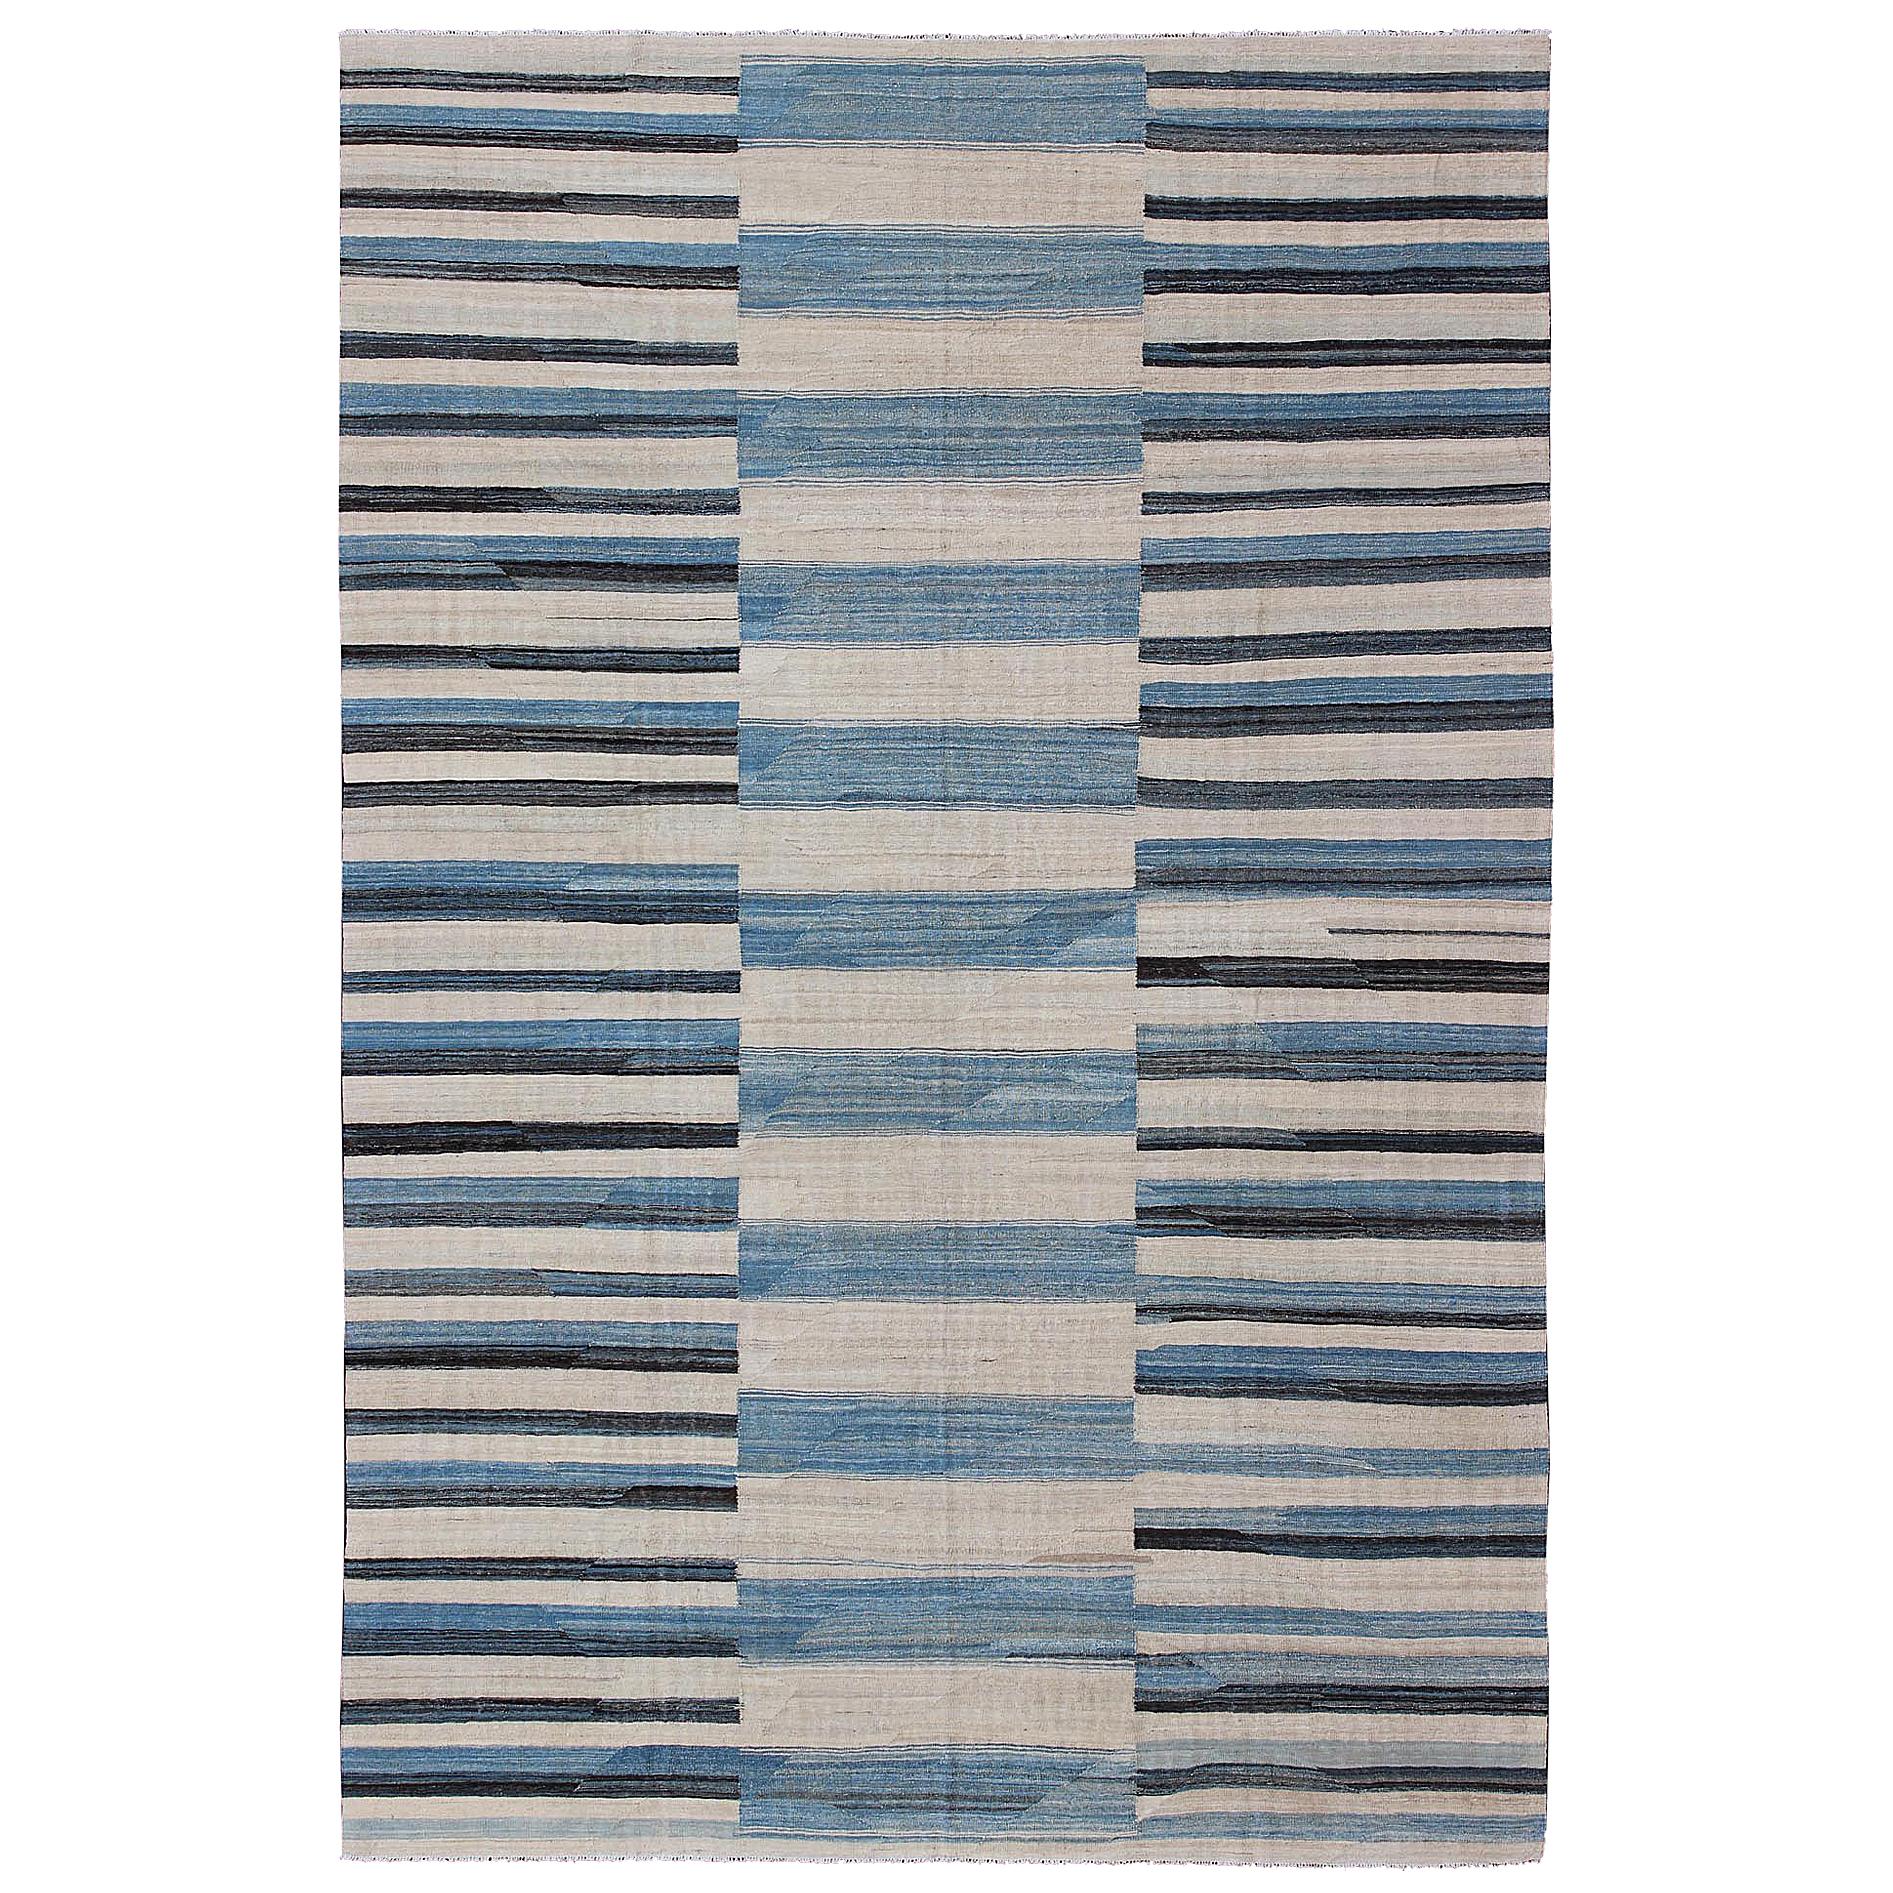 Flat-Weave Kilim Rug with Classic Stripe Design in Blue, Ivory, Charcoal